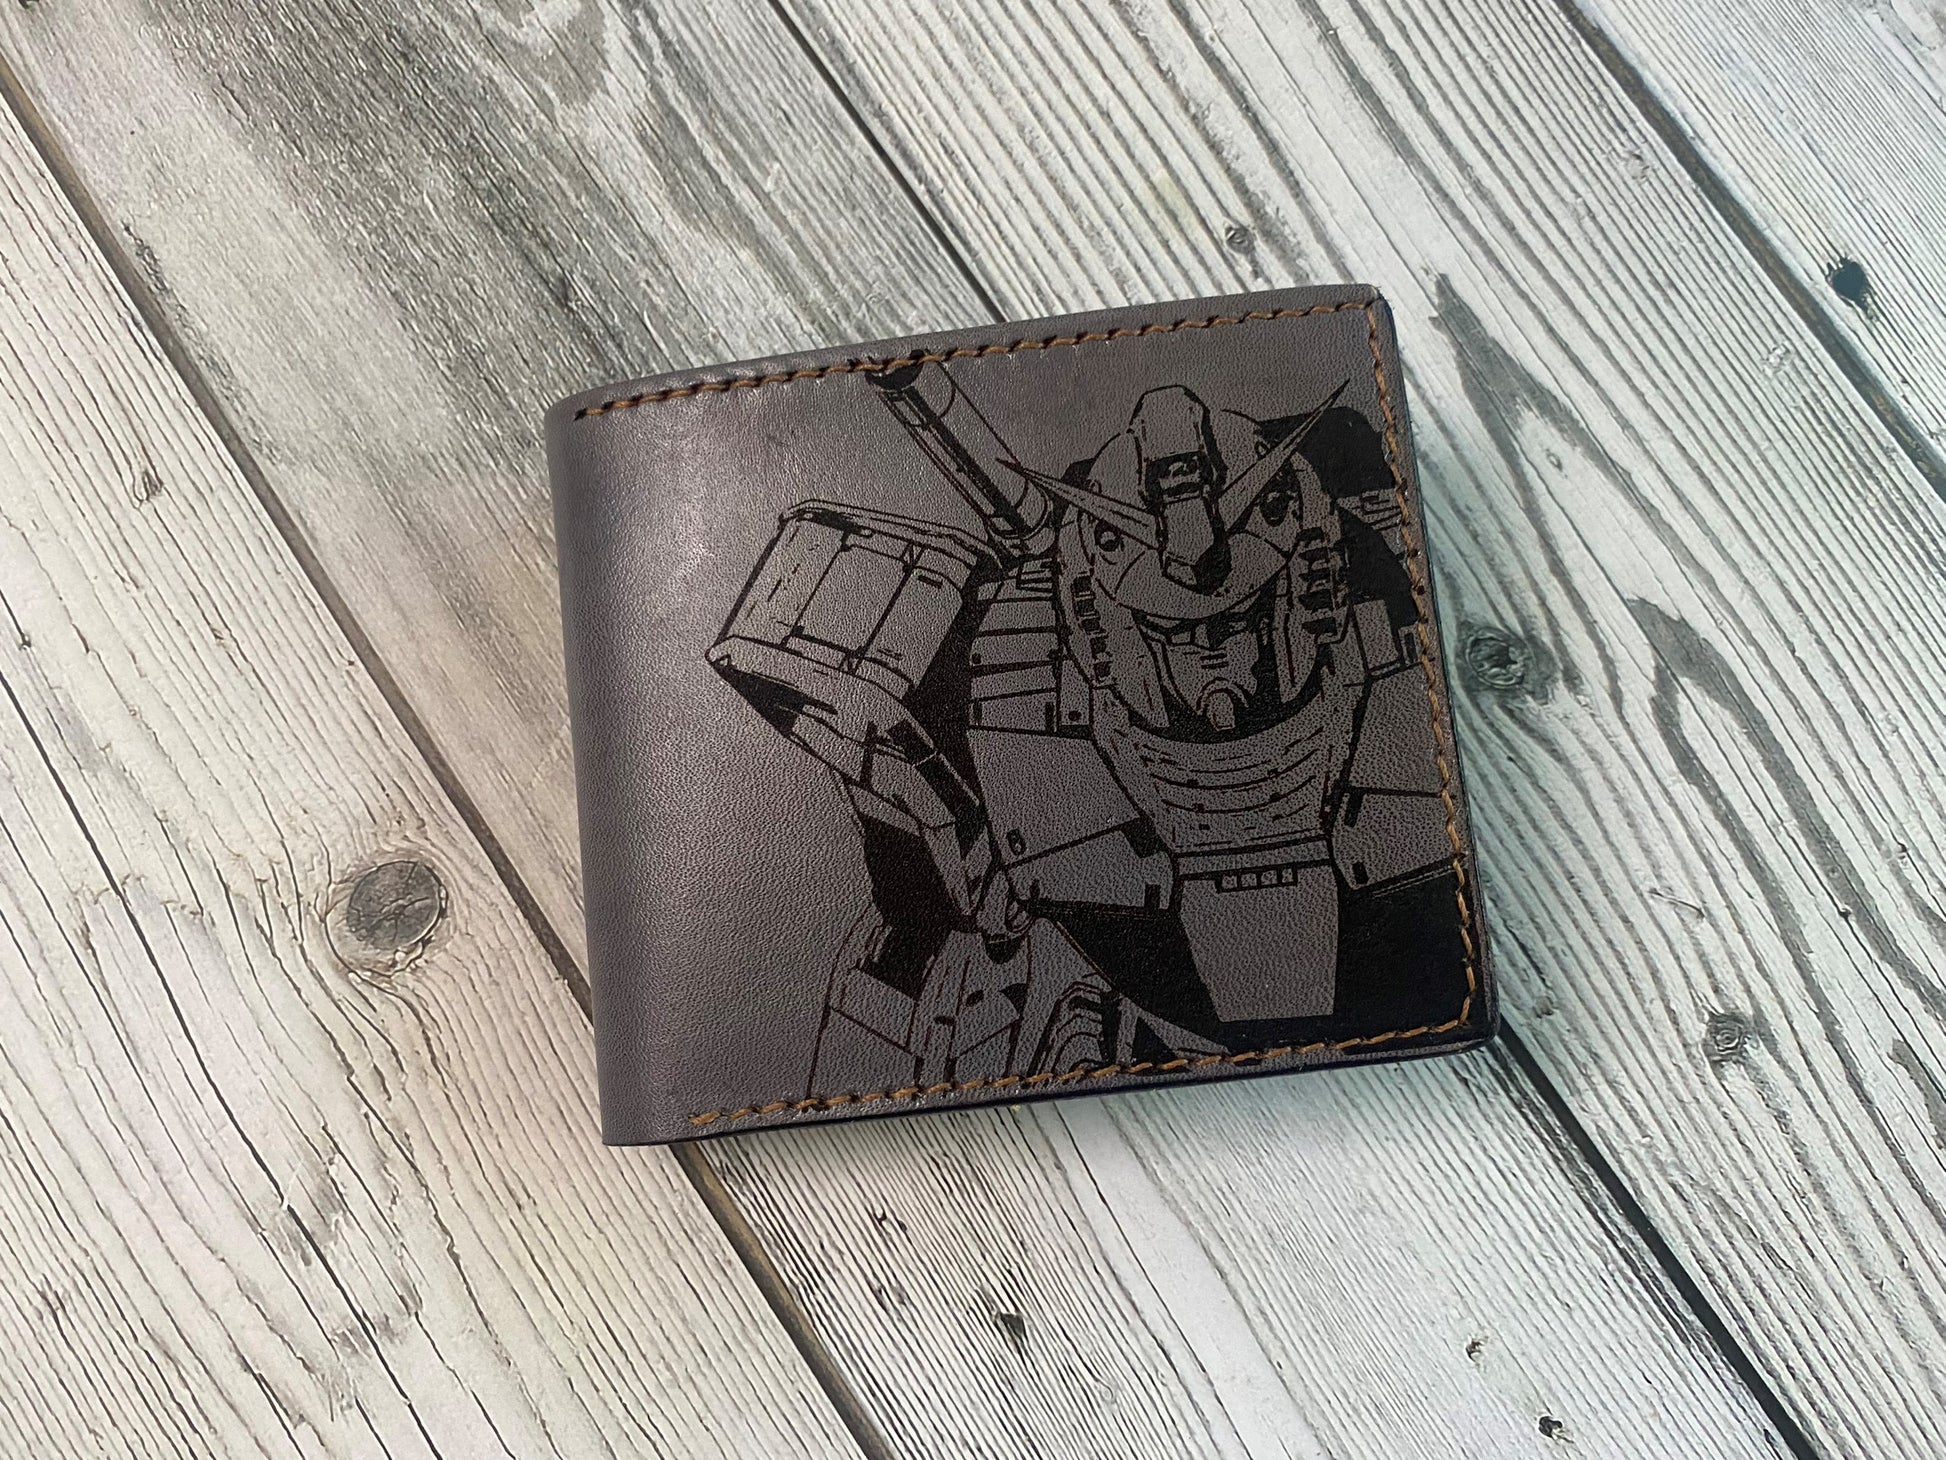 Gundam giant robots art wallet, customized mechanical android Japan wallet, anime robot gift ideas for him, fiction manga art leather gift